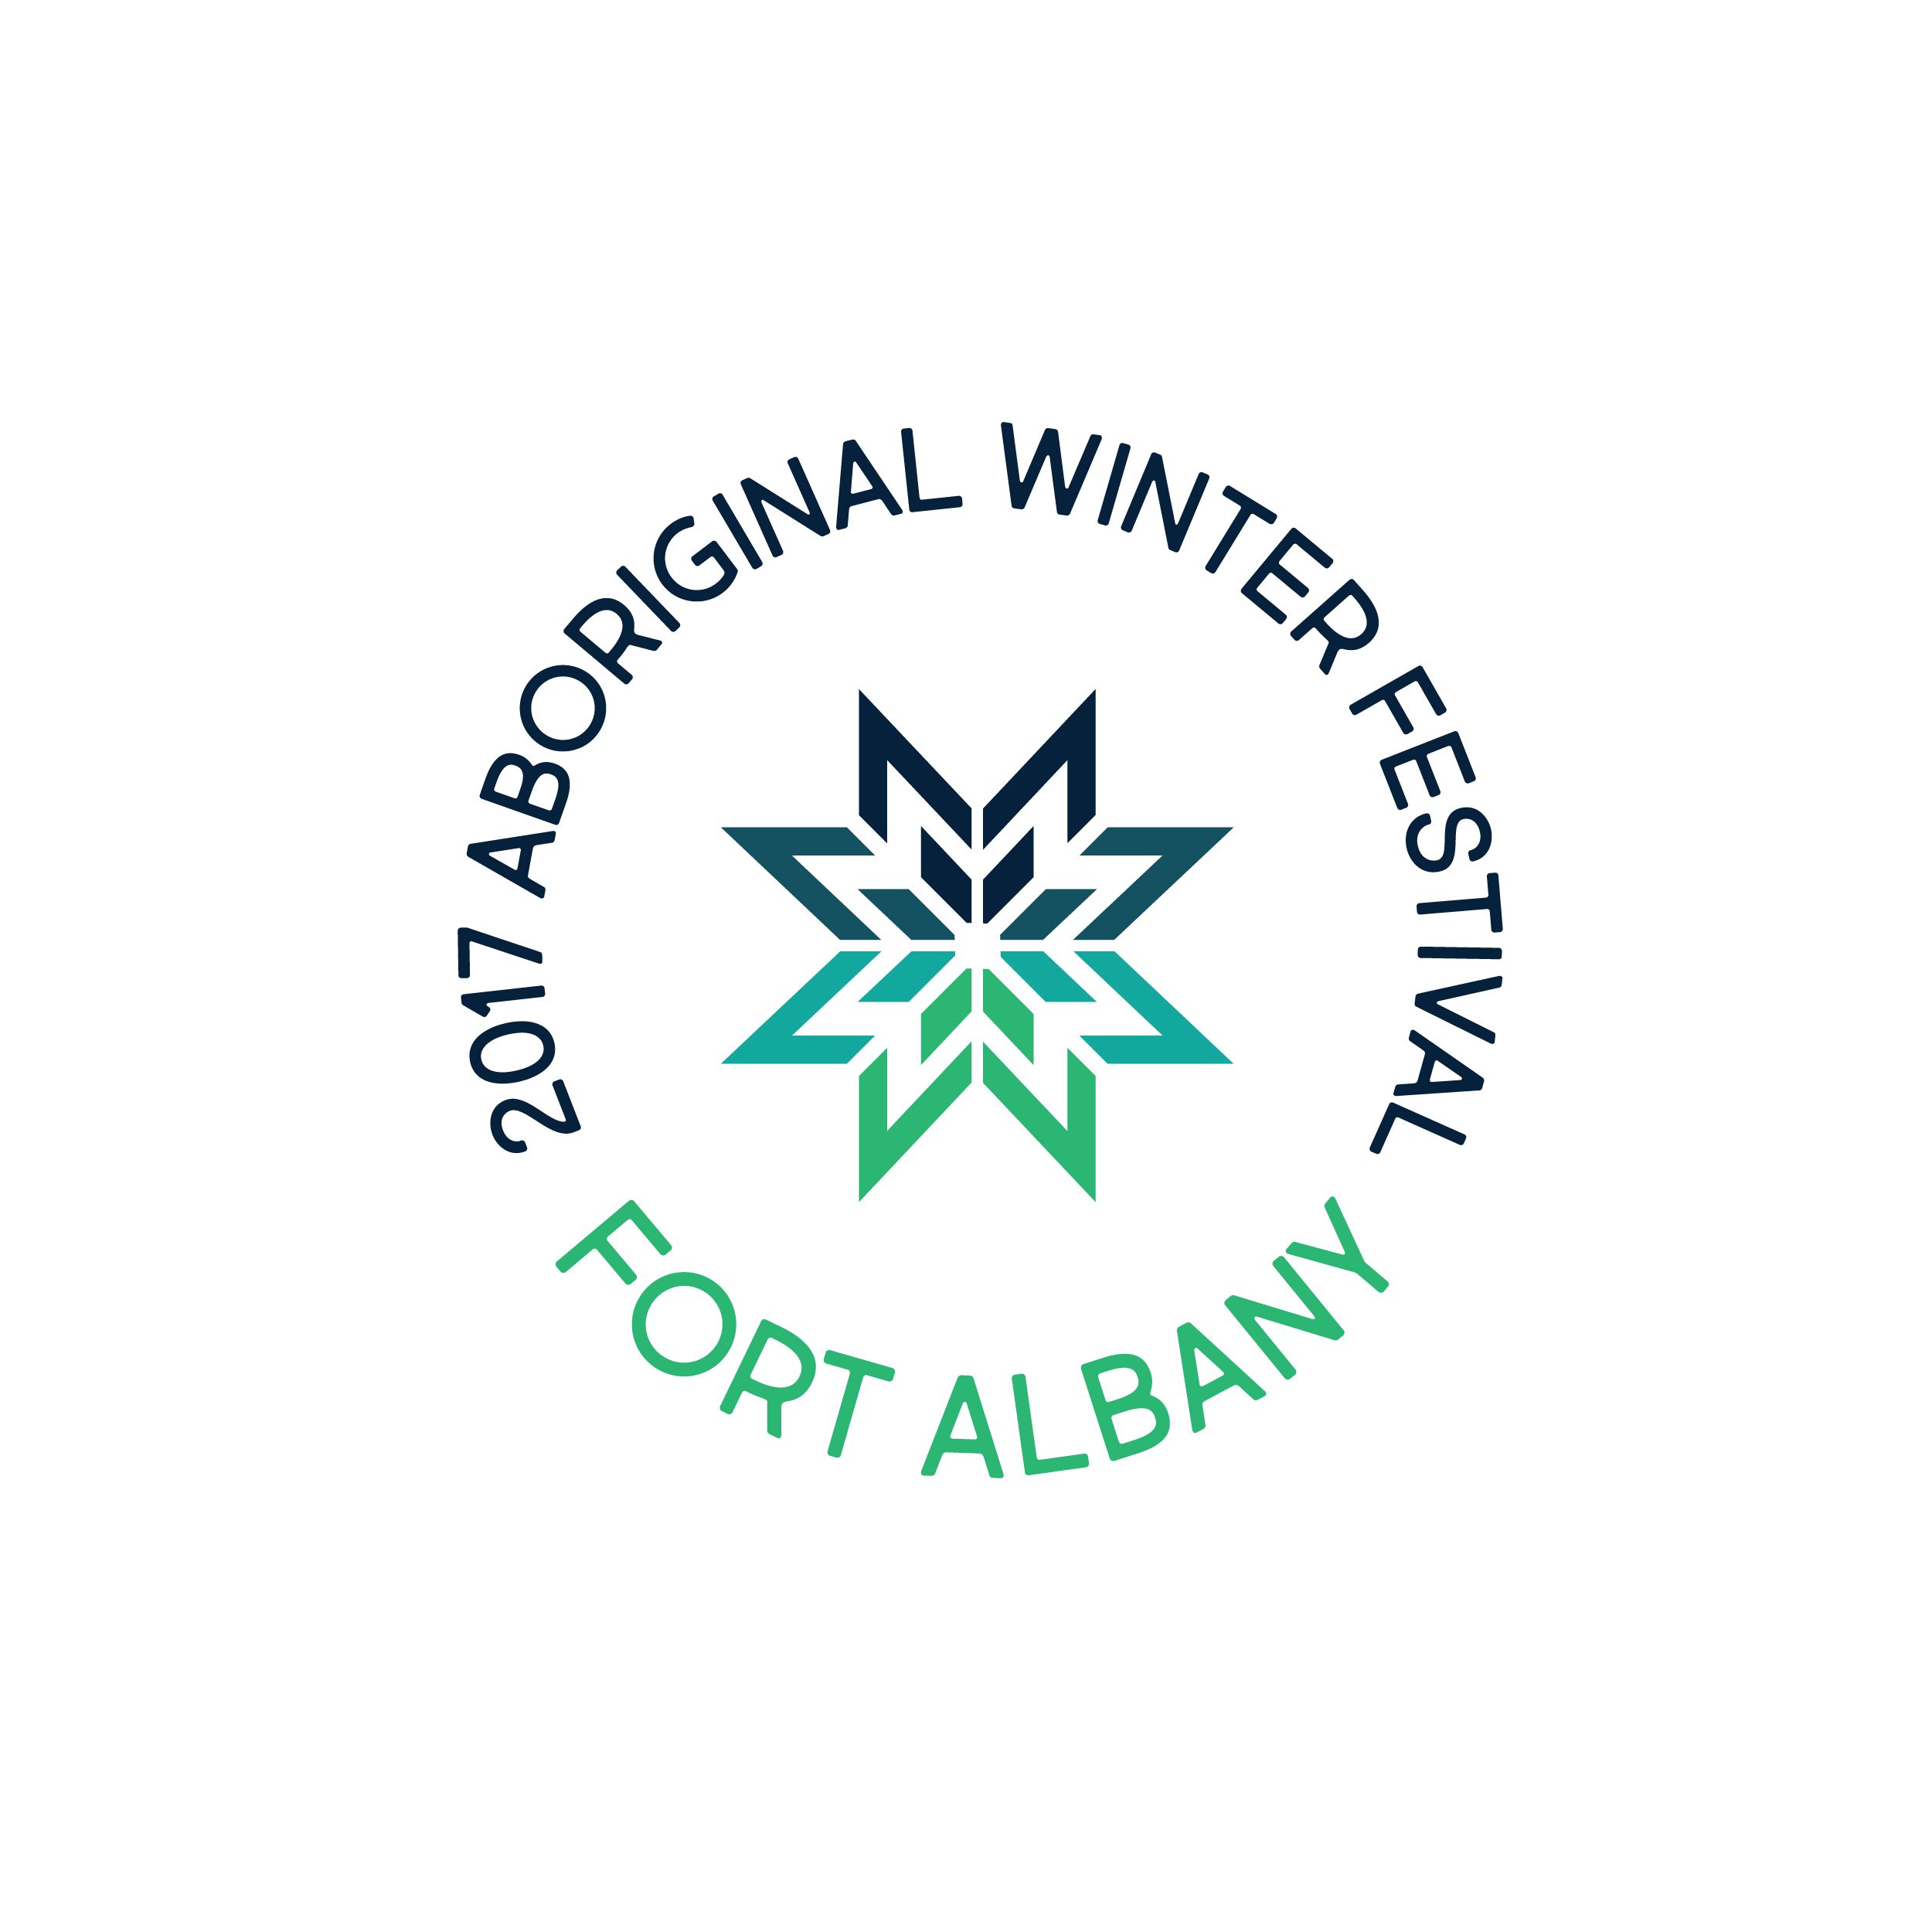 Aborigina Winter festival logo design by logo designer Jensen Group for your inspiration and for the worlds largest logo competition